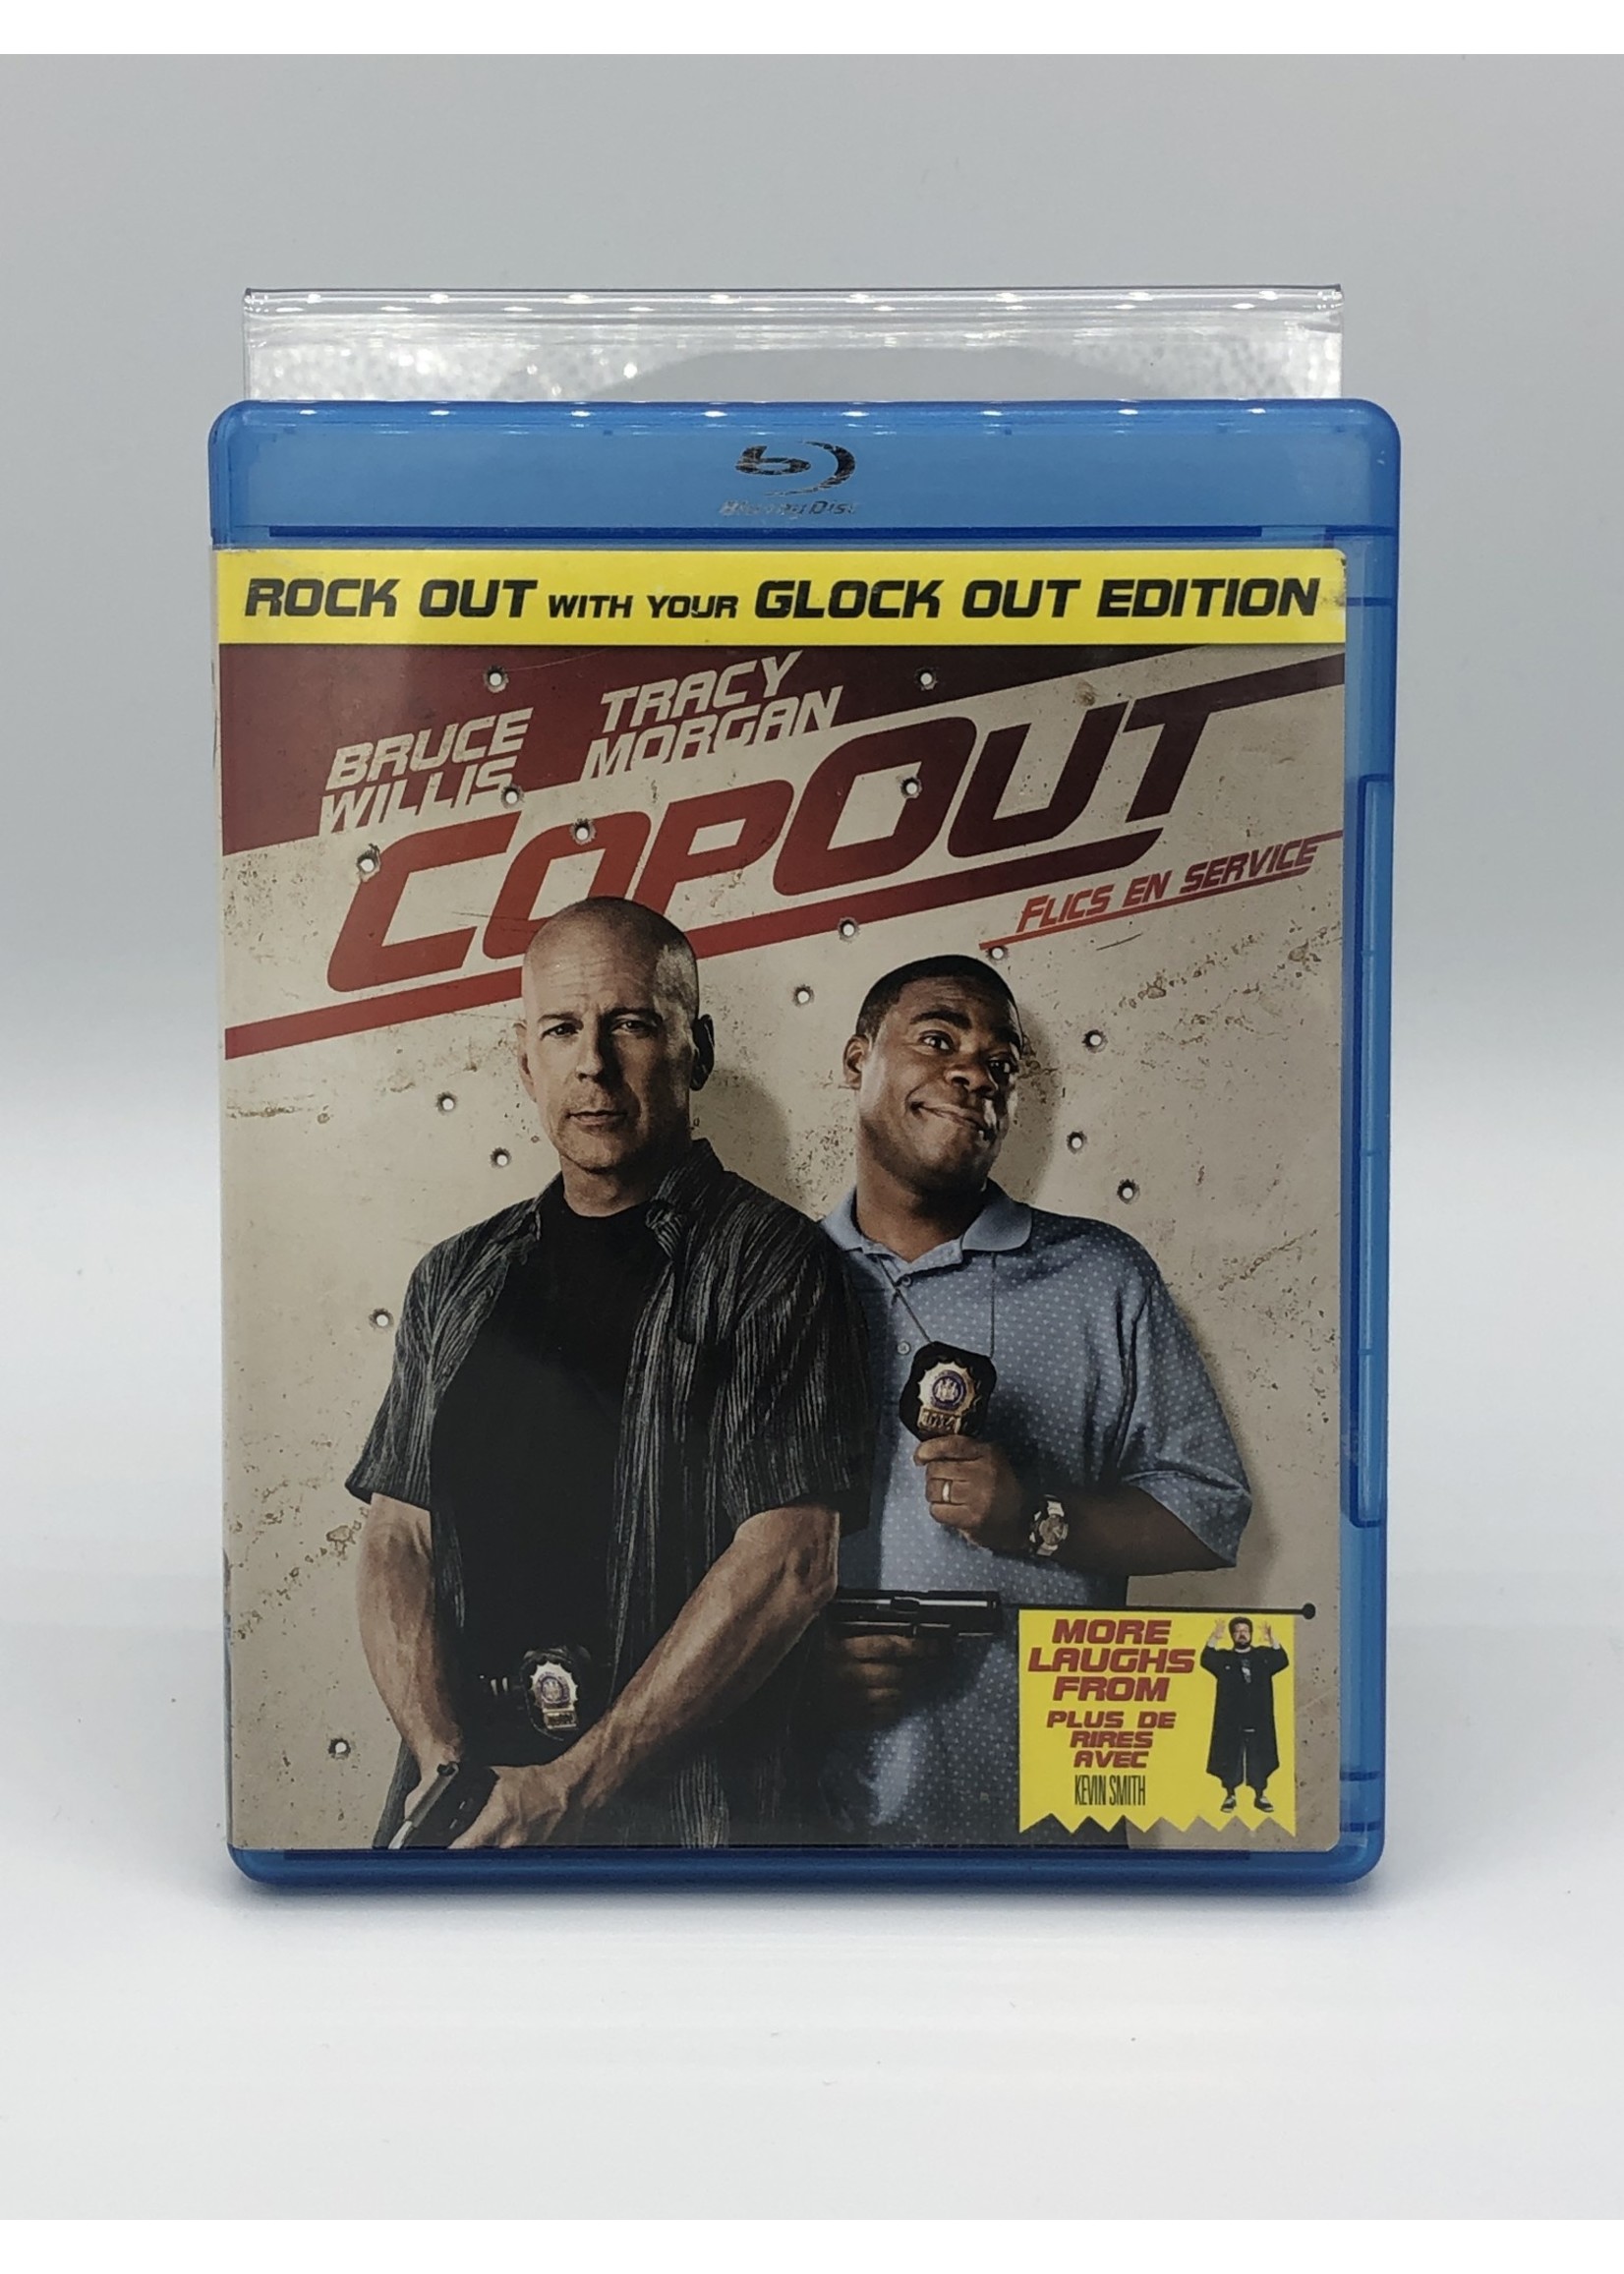 Bluray Cop Out: Rock Out with your Glock Out Edition Bluray